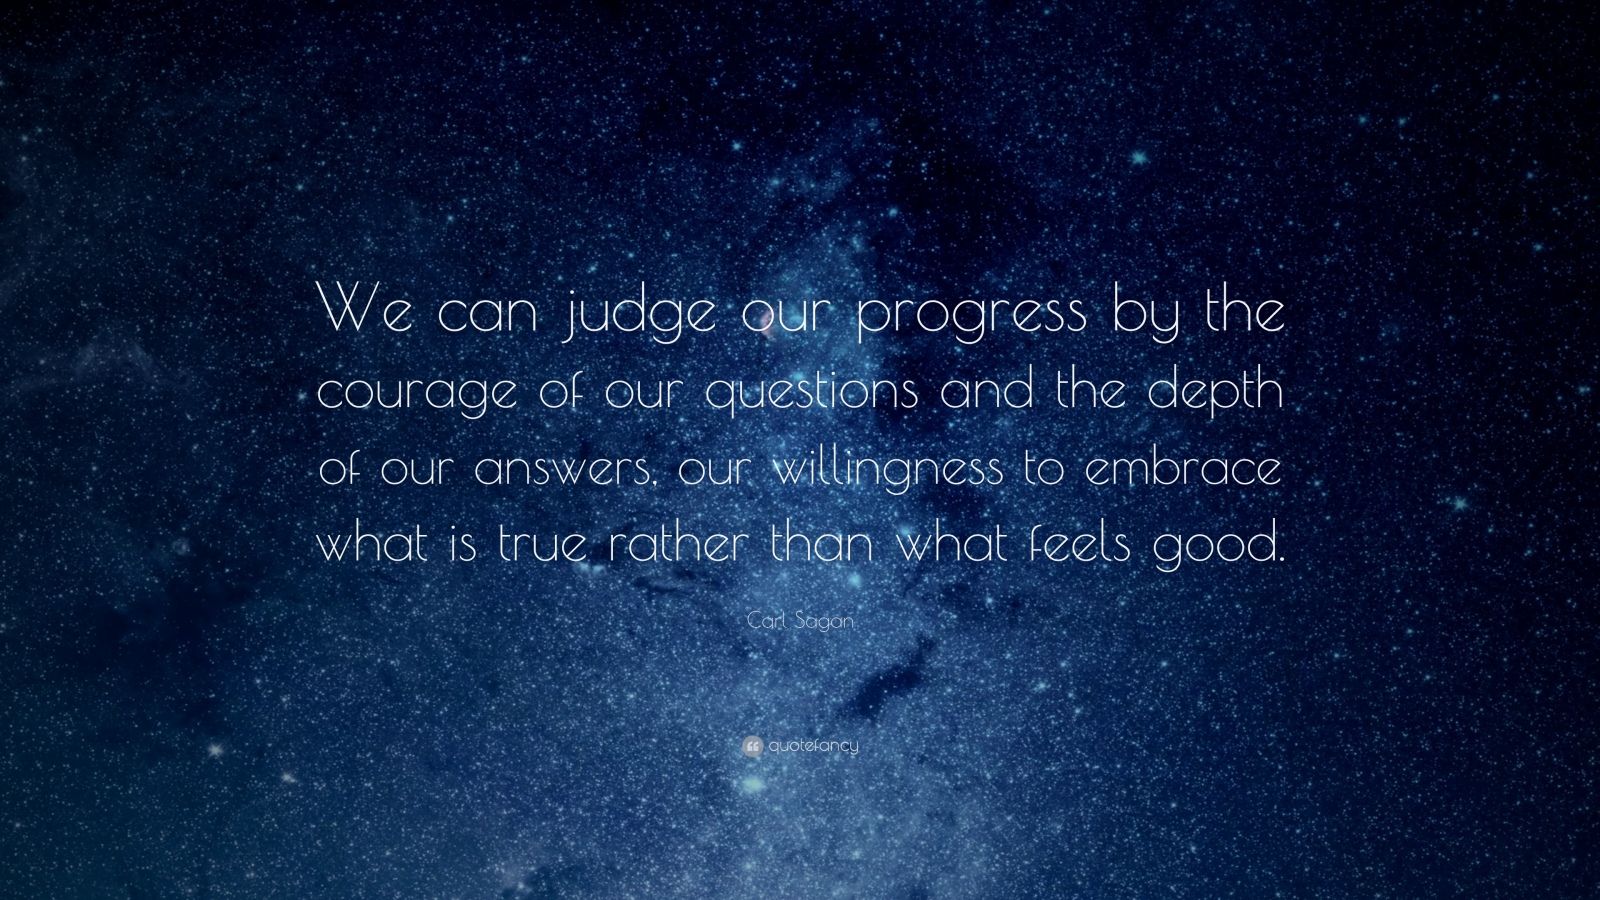 Carl Sagan Quote: “We can judge our progress by the courage of our